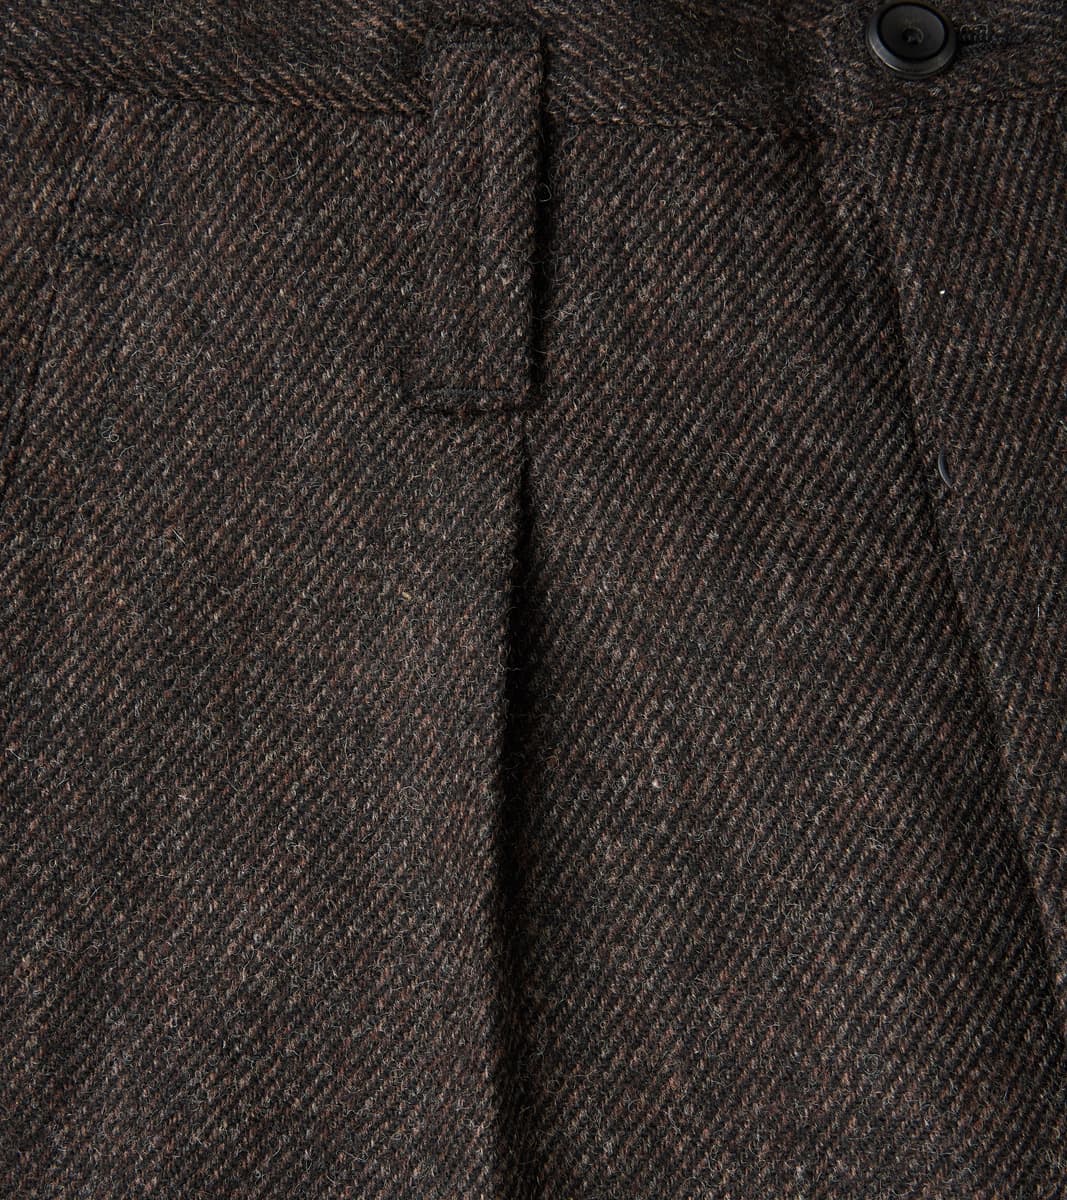 Iron-on Wool Elbow Patches -Light Brown Herringbone - Limited